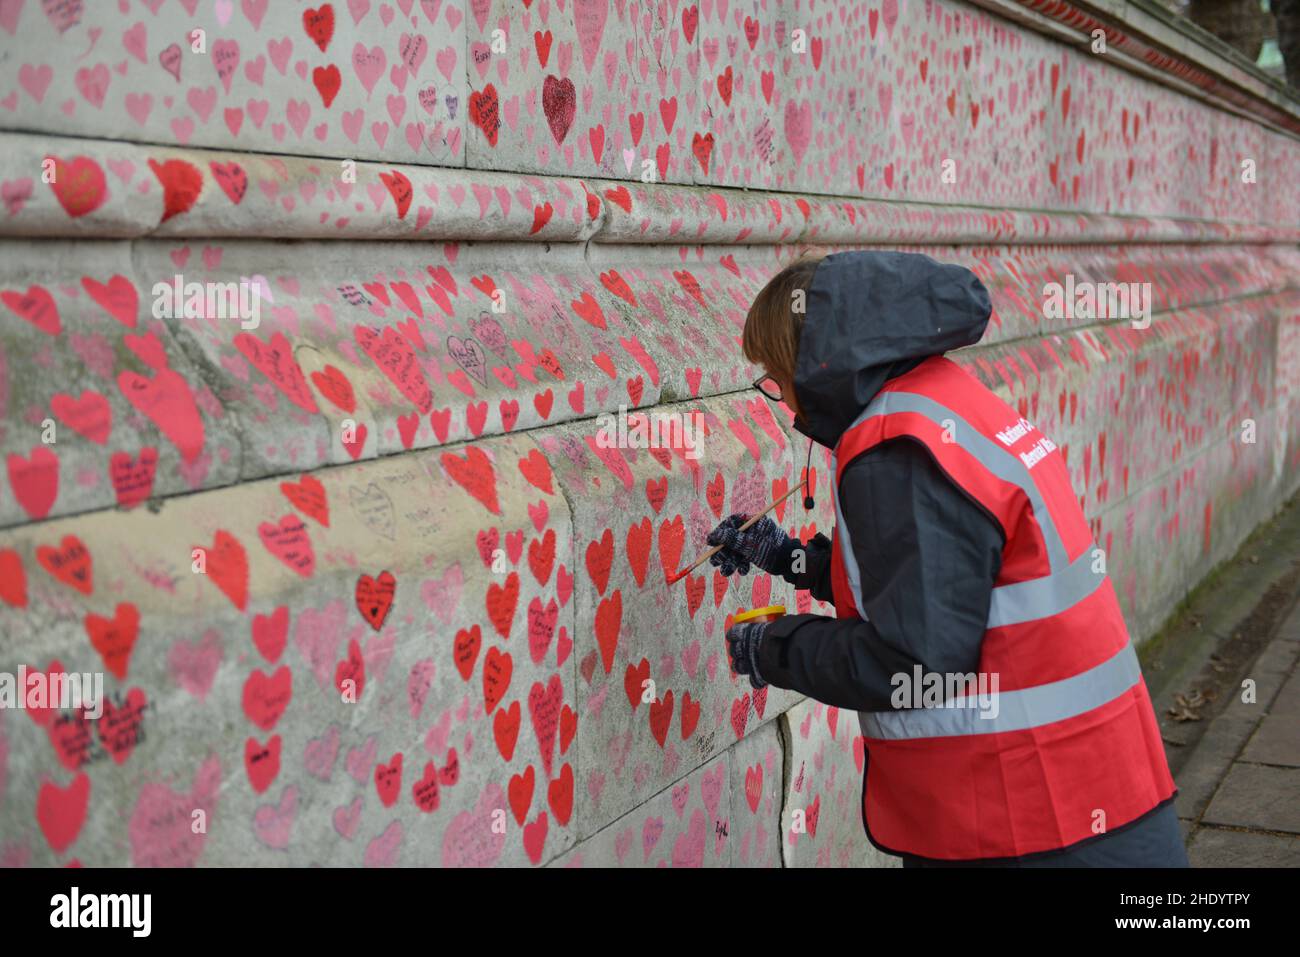 London, UK. 07th Jan, 2022. Volunteers paint new hearts on The National Covid Memorial Wall, just outside St Thomas' Hospital. Hospitals in London face rising number of Covid patients. Credit: Thomas Krych/Alamy Live News Stock Photo